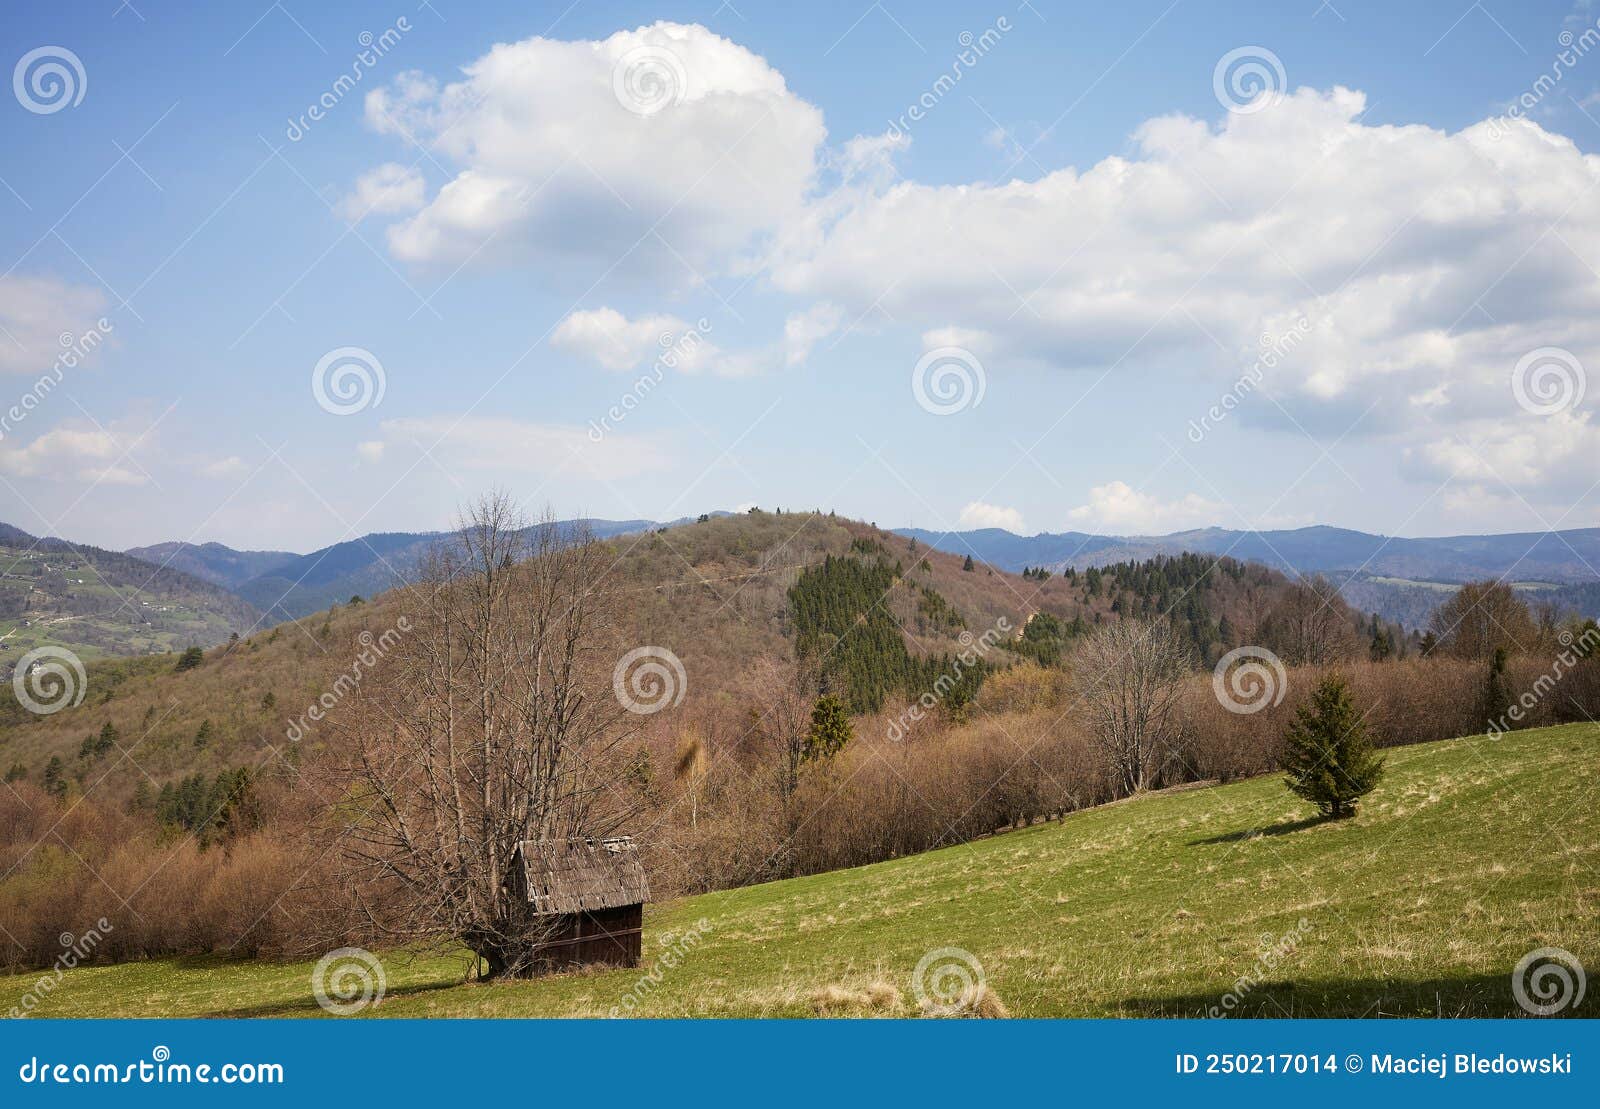 view of the pienin mountains on a sunny day, poland